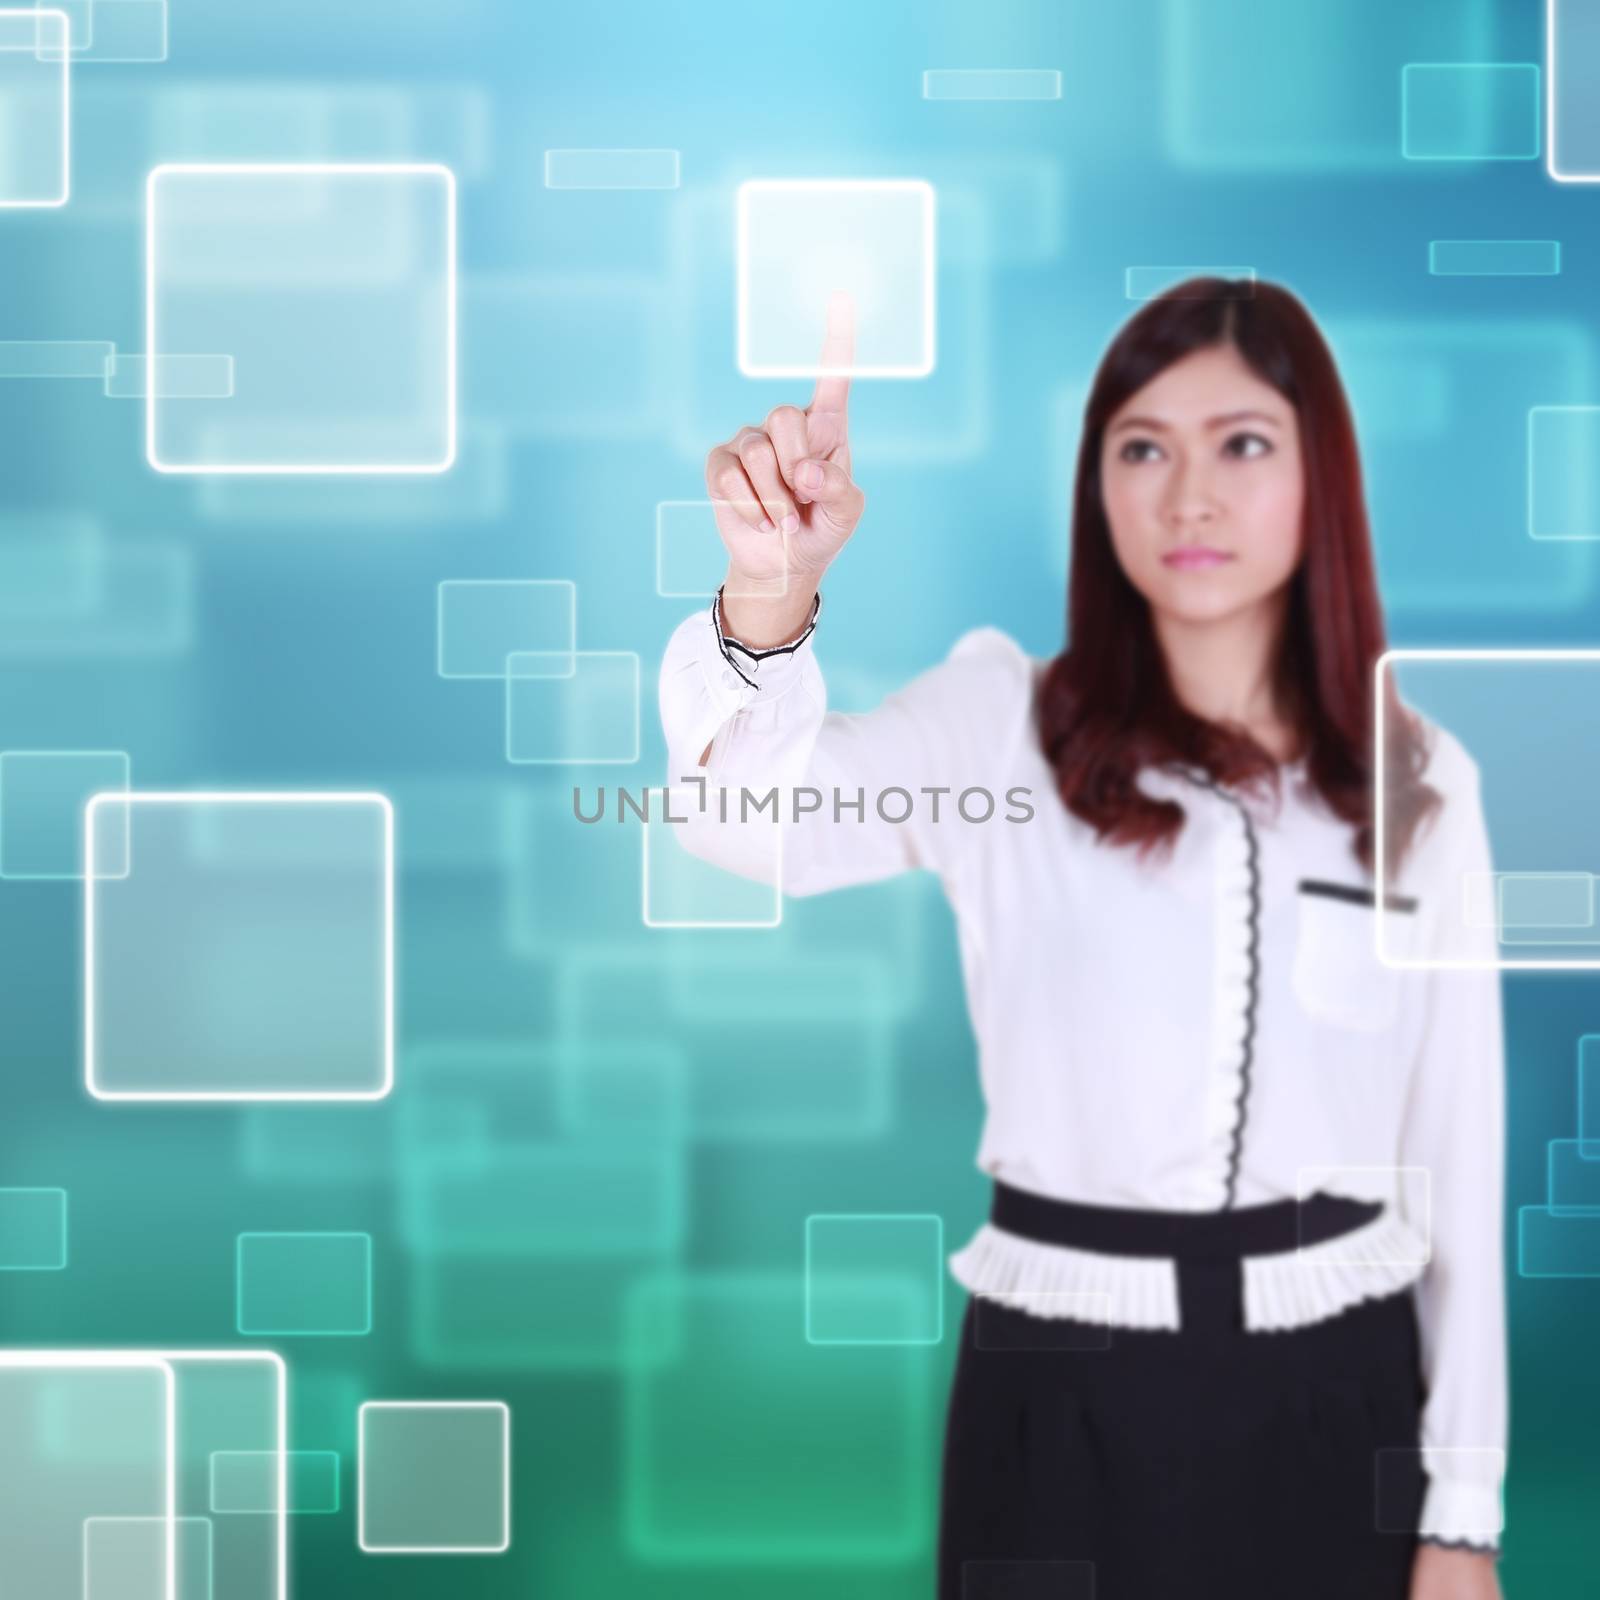 woman pushing button on a touch screen interface